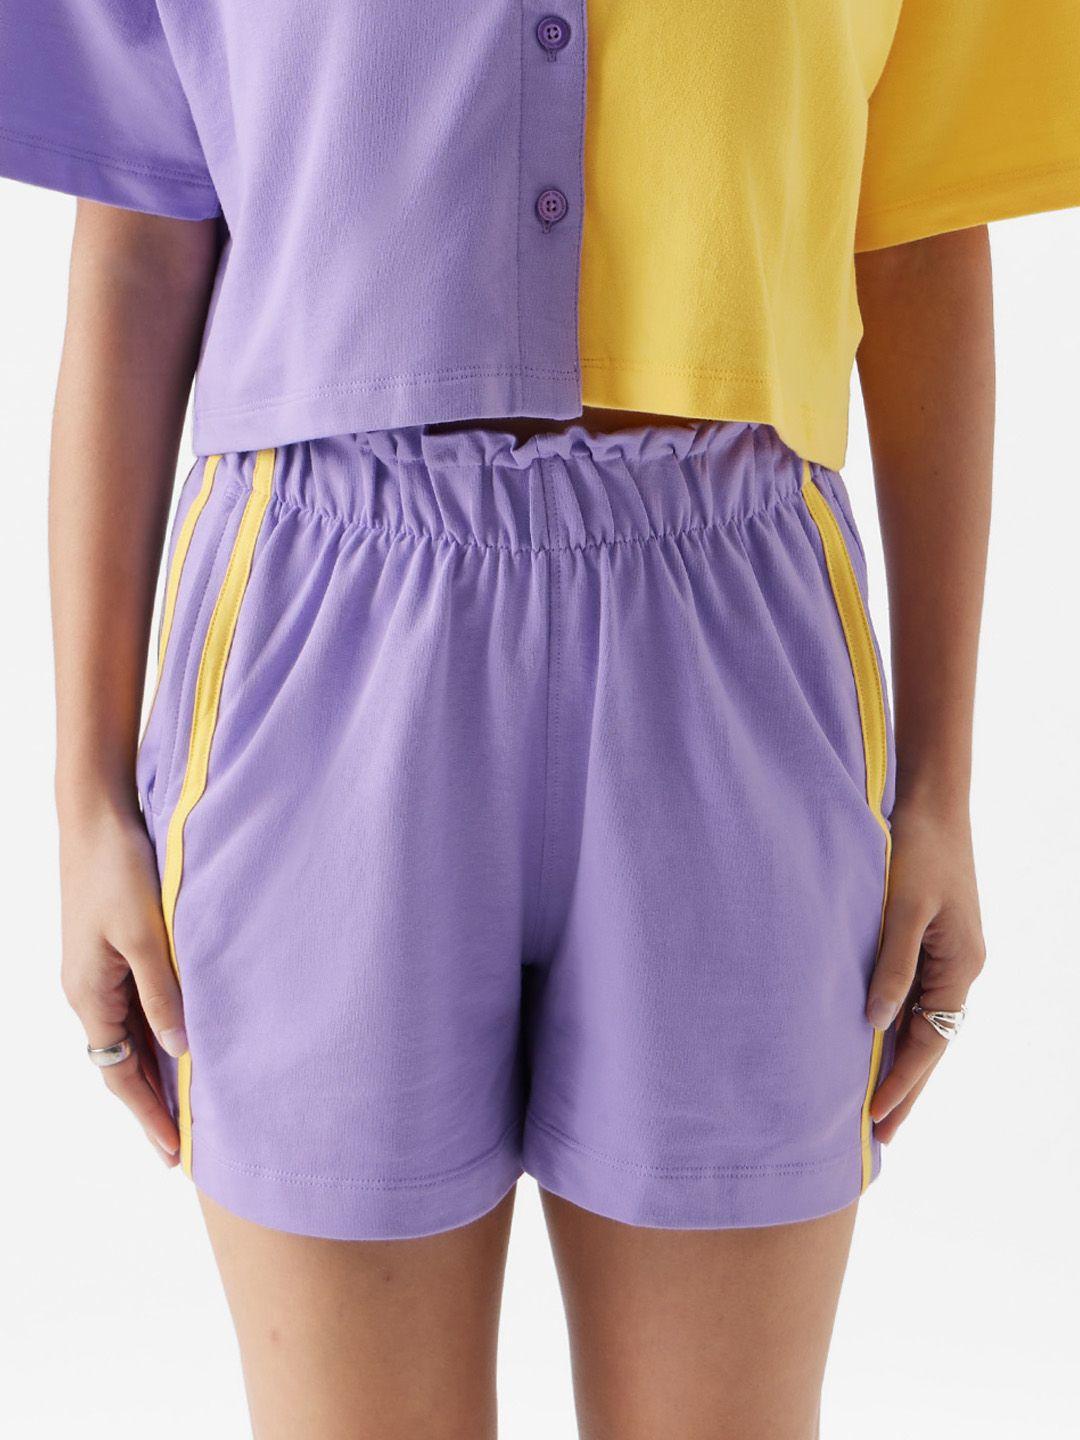 the souled store women lavender sports shorts